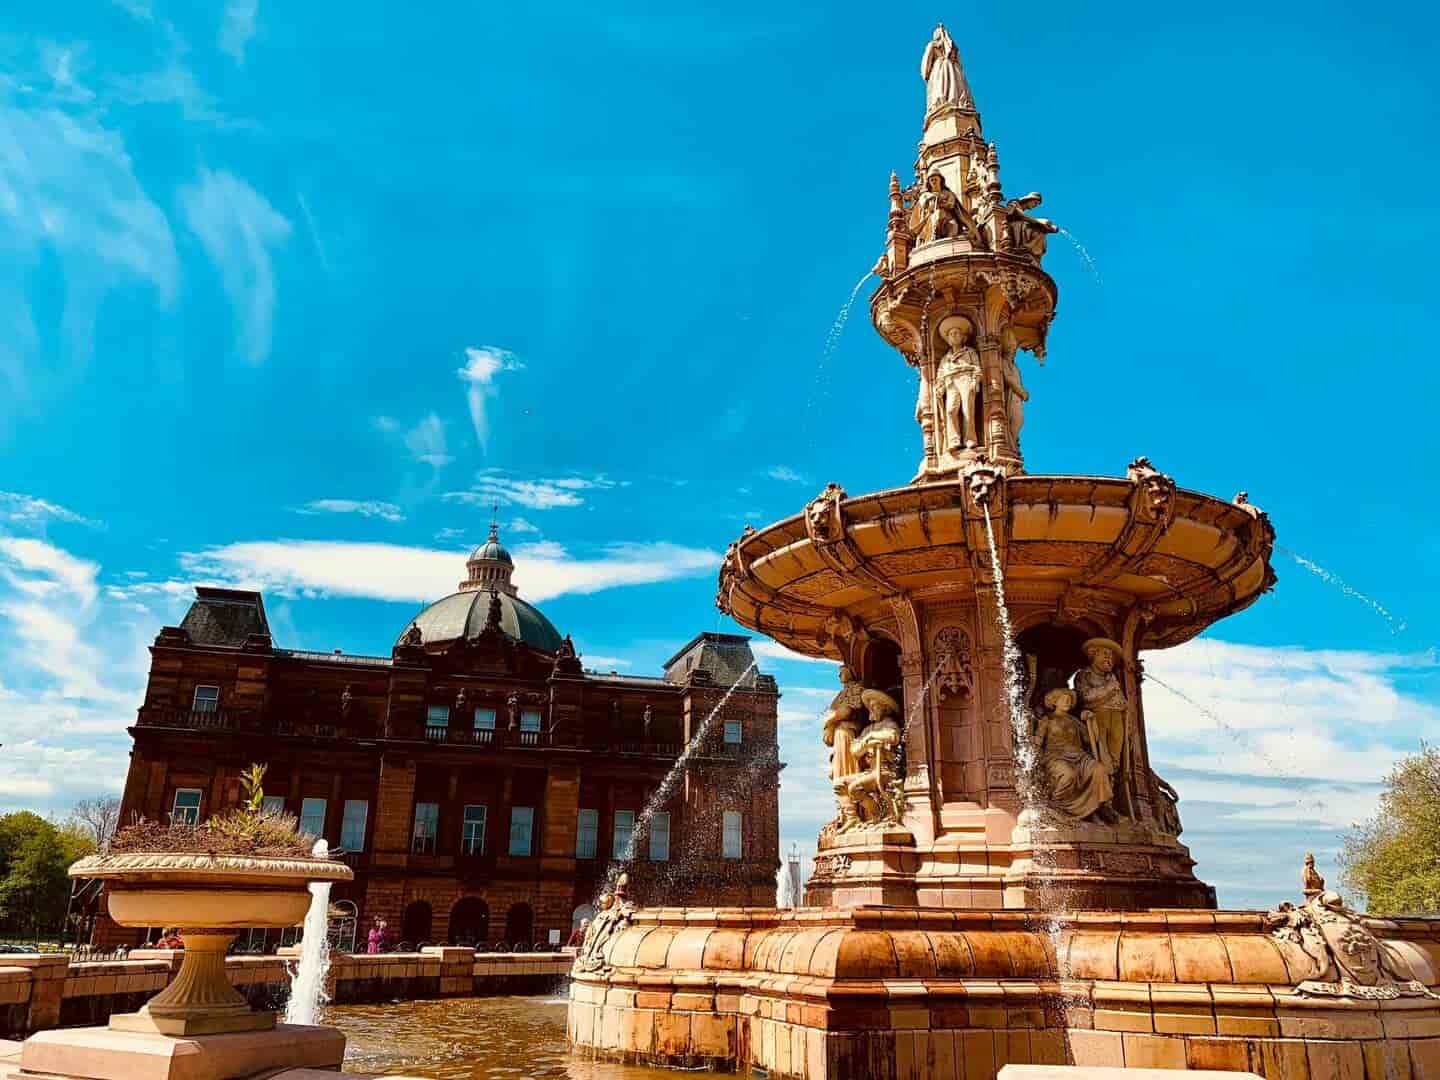 Student Accommodation in Glasgow - Doulton Fountain, the largest terracotta fountain ever constructed